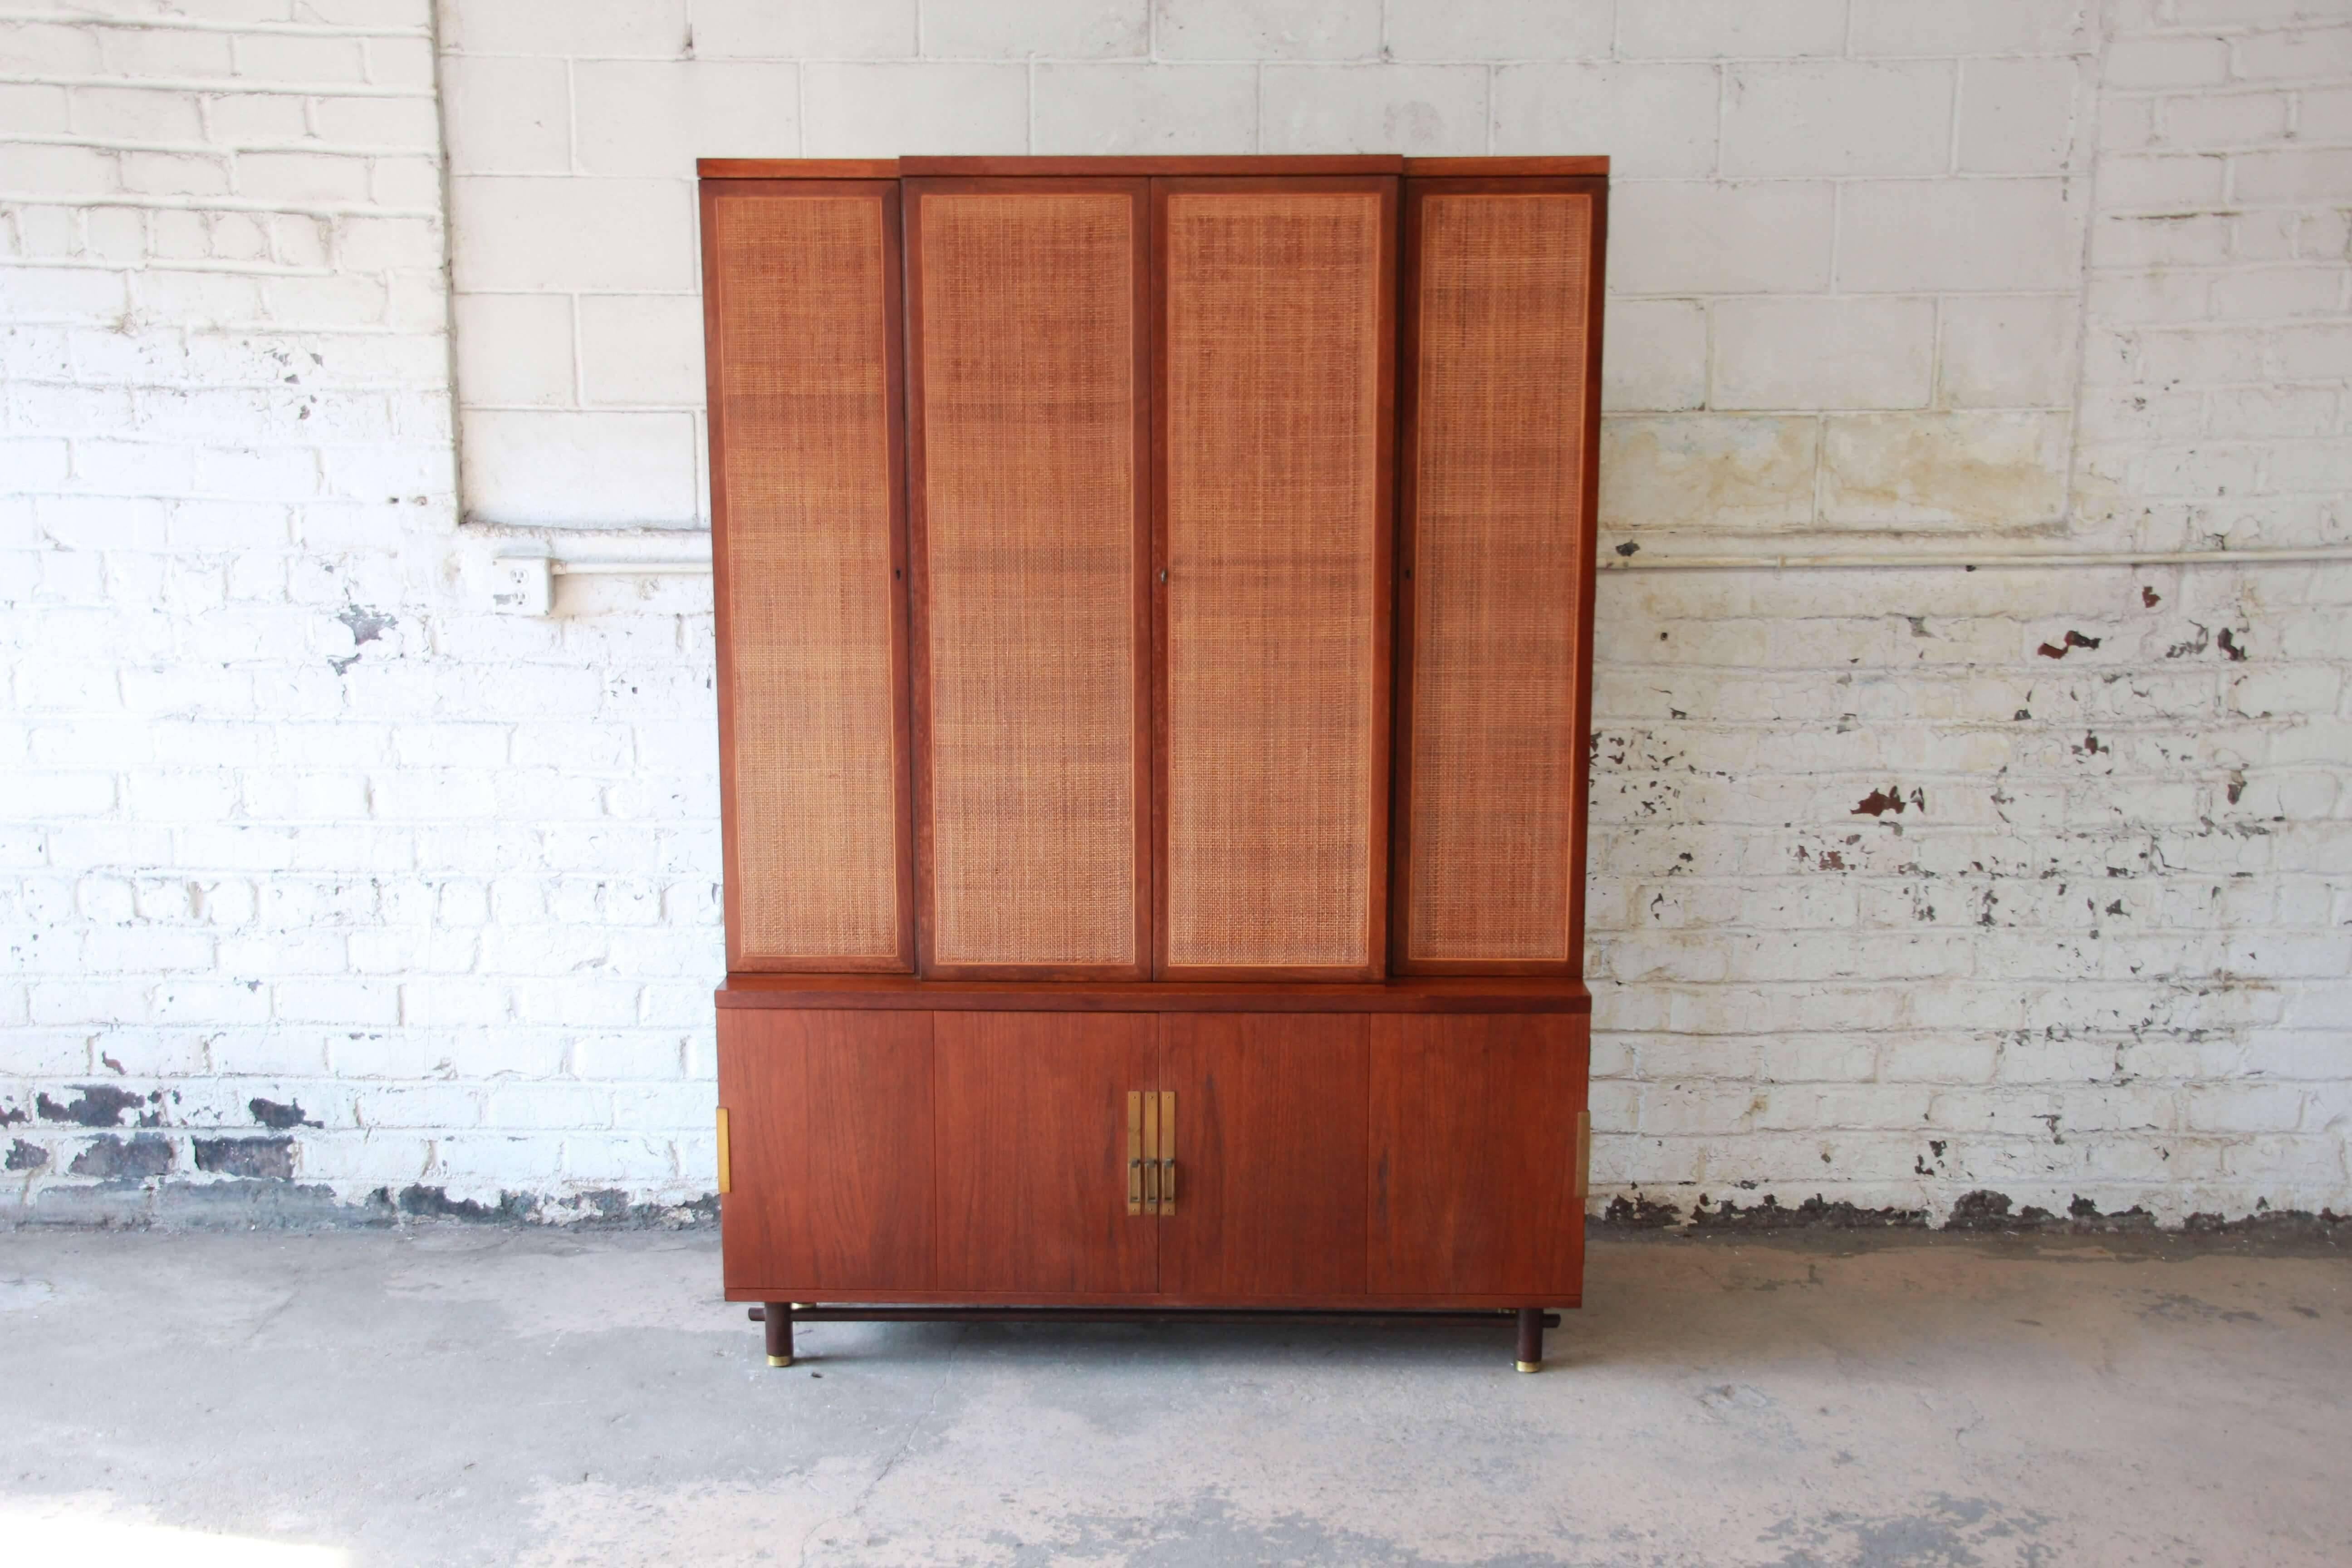 Offering an exceptional woven front Mid-Century Modern wall unit cabinet by Baker Furniture. The cabinets centre doors open up to three adjustable shelves for storage. On each side there is an additional cabinet door that opens up to a smaller